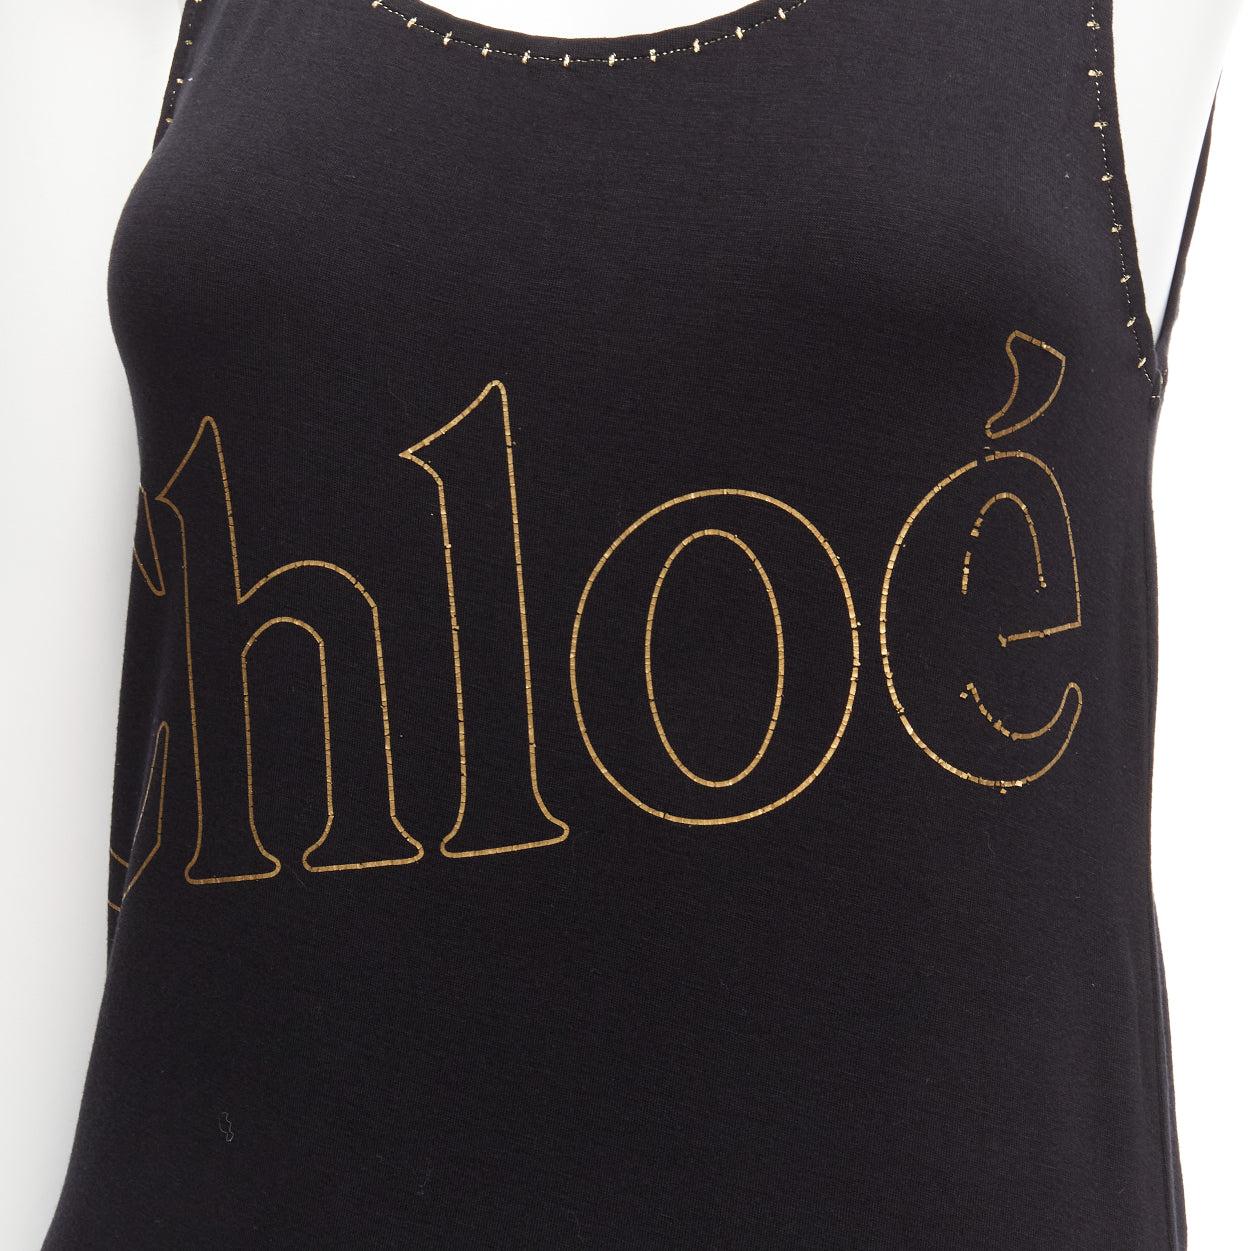 CHLOE gold foil logo black topstitch detail rock chic tank top dress S
Reference: SNKO/A00286
Brand: Chloe
Material: Rayon, Blend
Color: Black, Gold
Pattern: Solid
Closure: Pullover
Made in: Italy

CONDITION:
Condition: Fair, this item was pre-owned